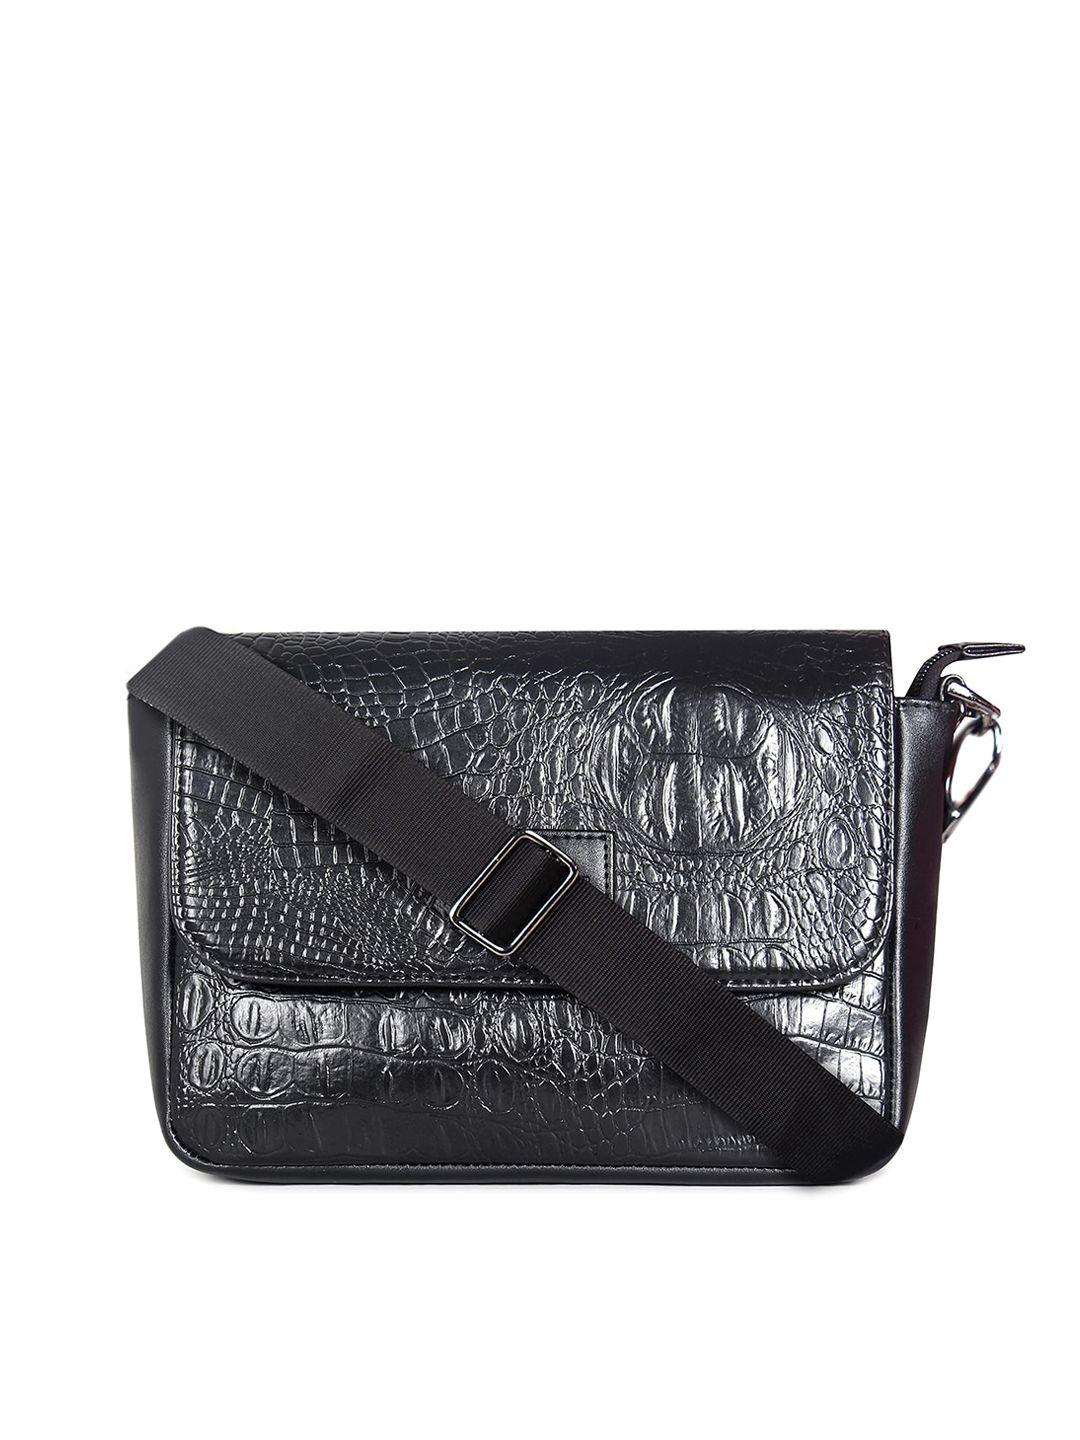 the clownfish textured structured sling bag